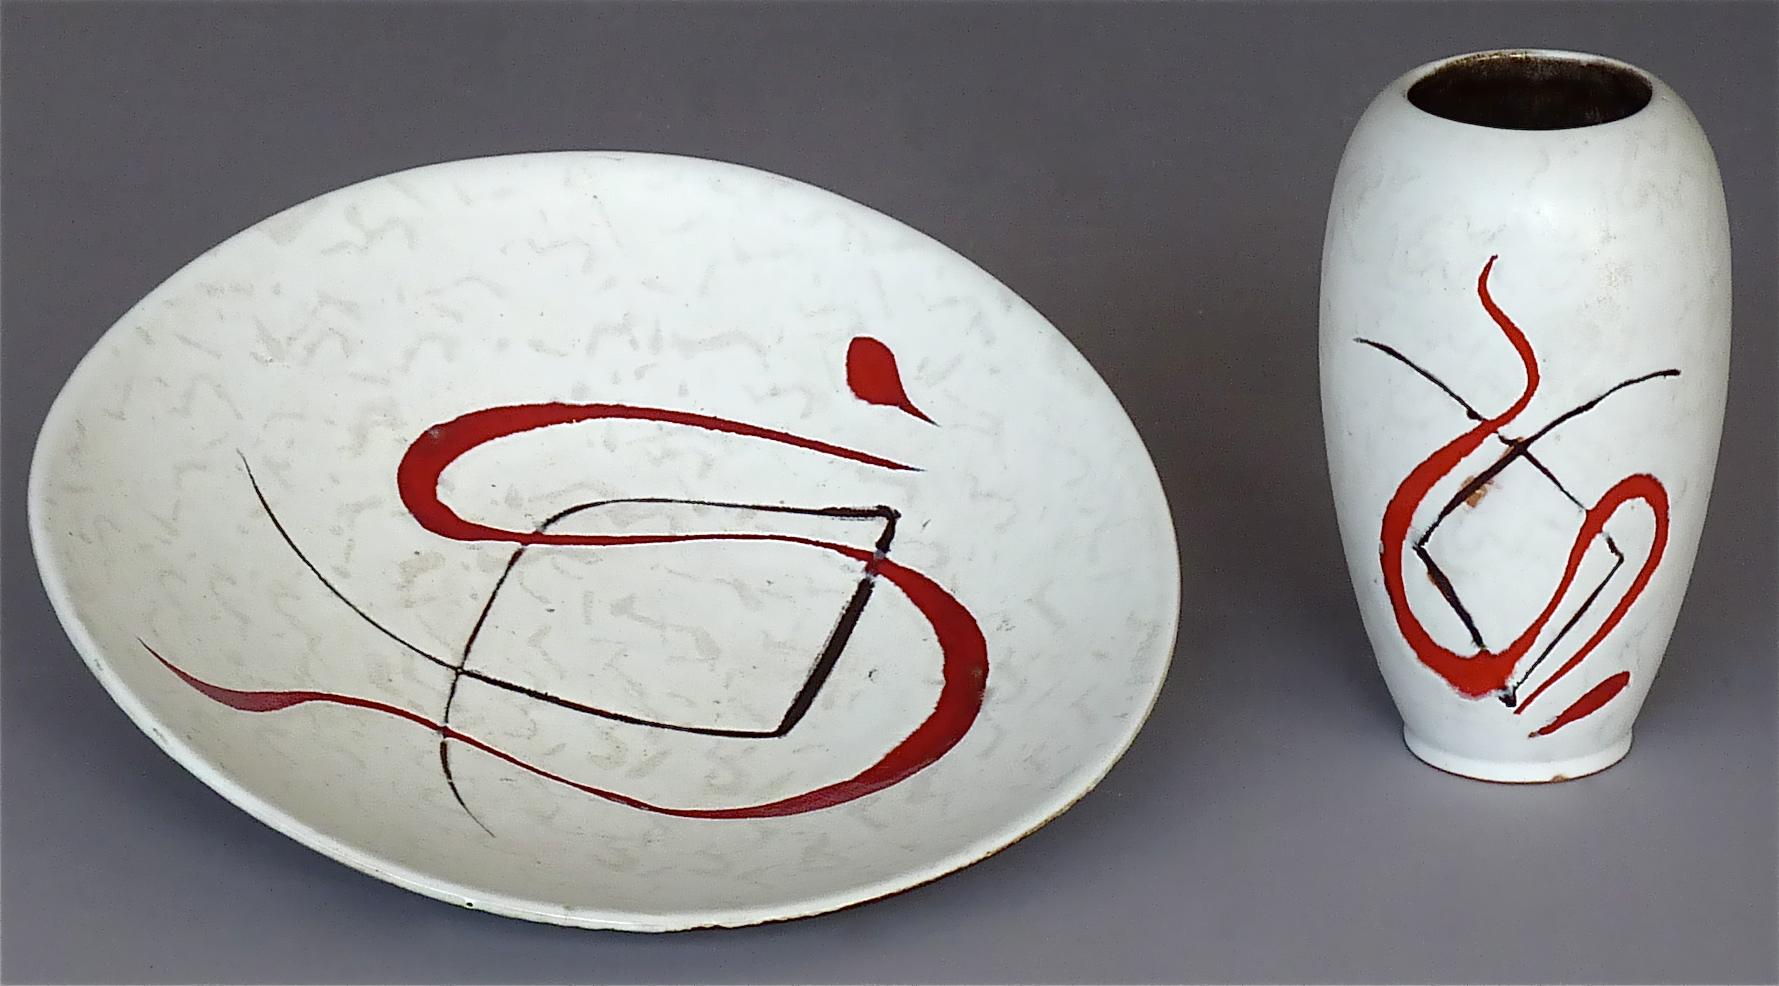 Abstract Midcentury Art Ceramic Vase and Bowl Gambone Miro Style White Red 1950s For Sale 11